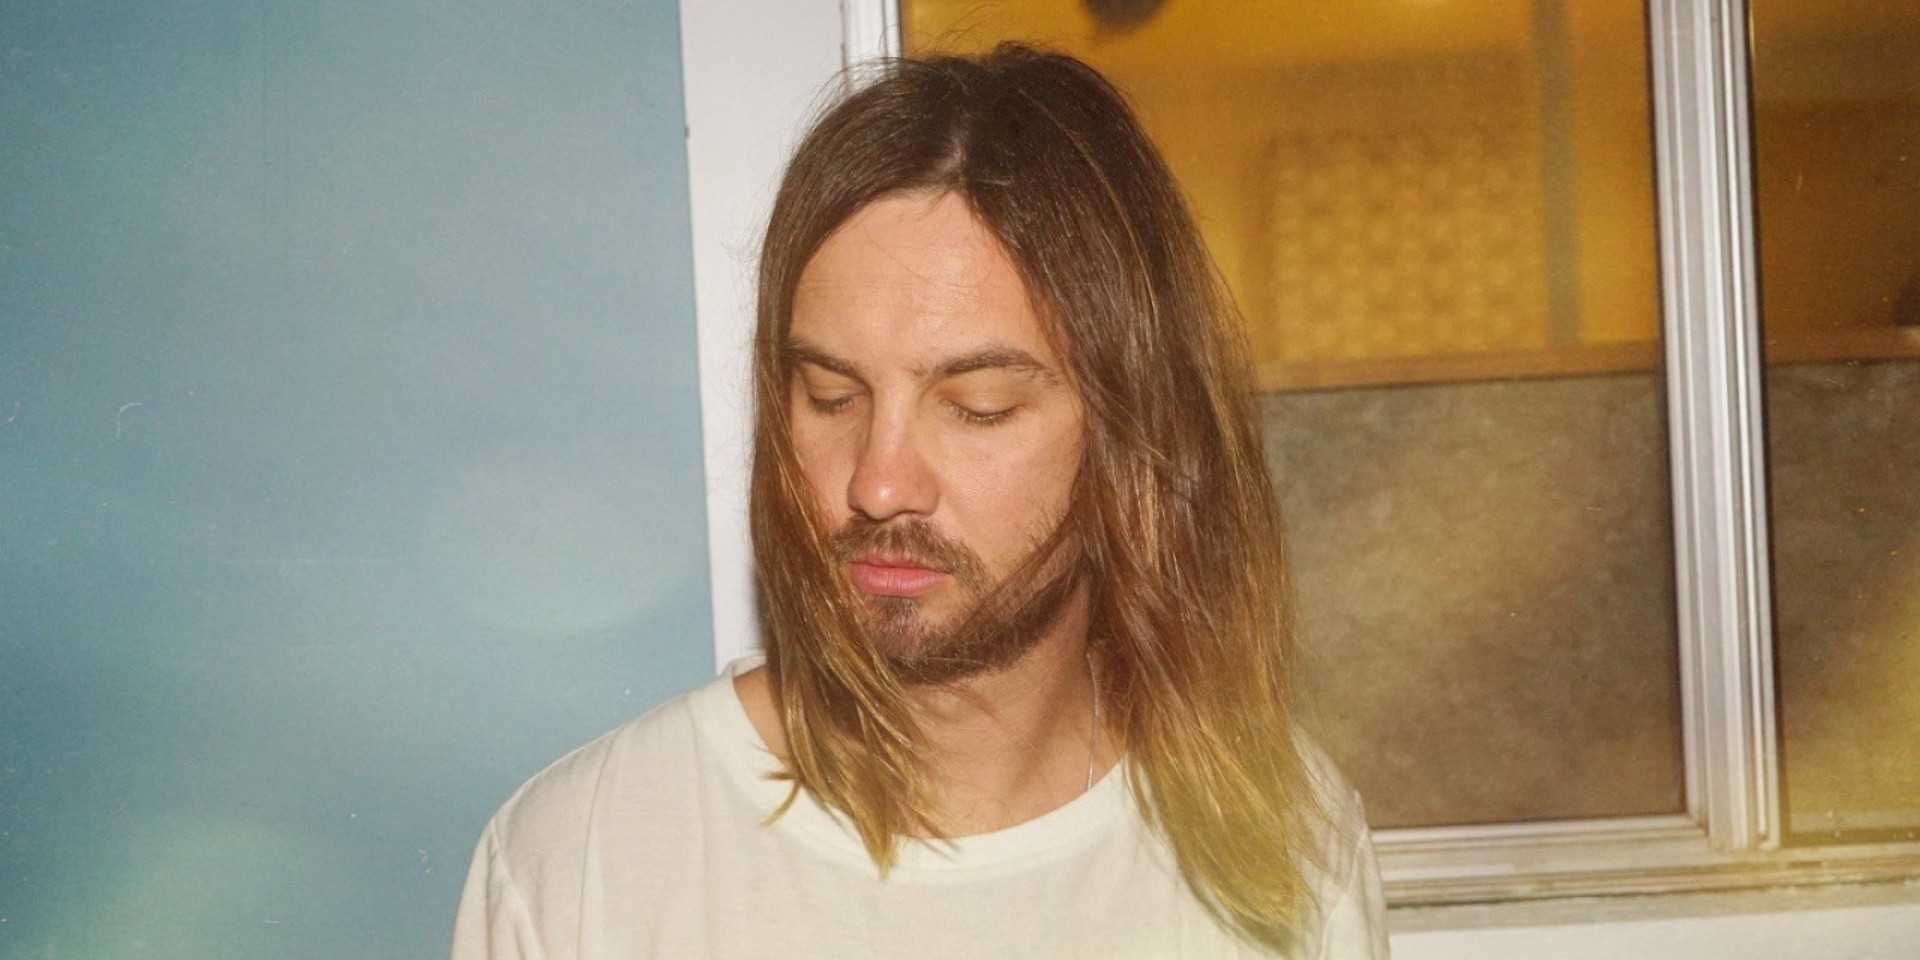 Tame Impala returns with breezy new single 'Patience' – listen